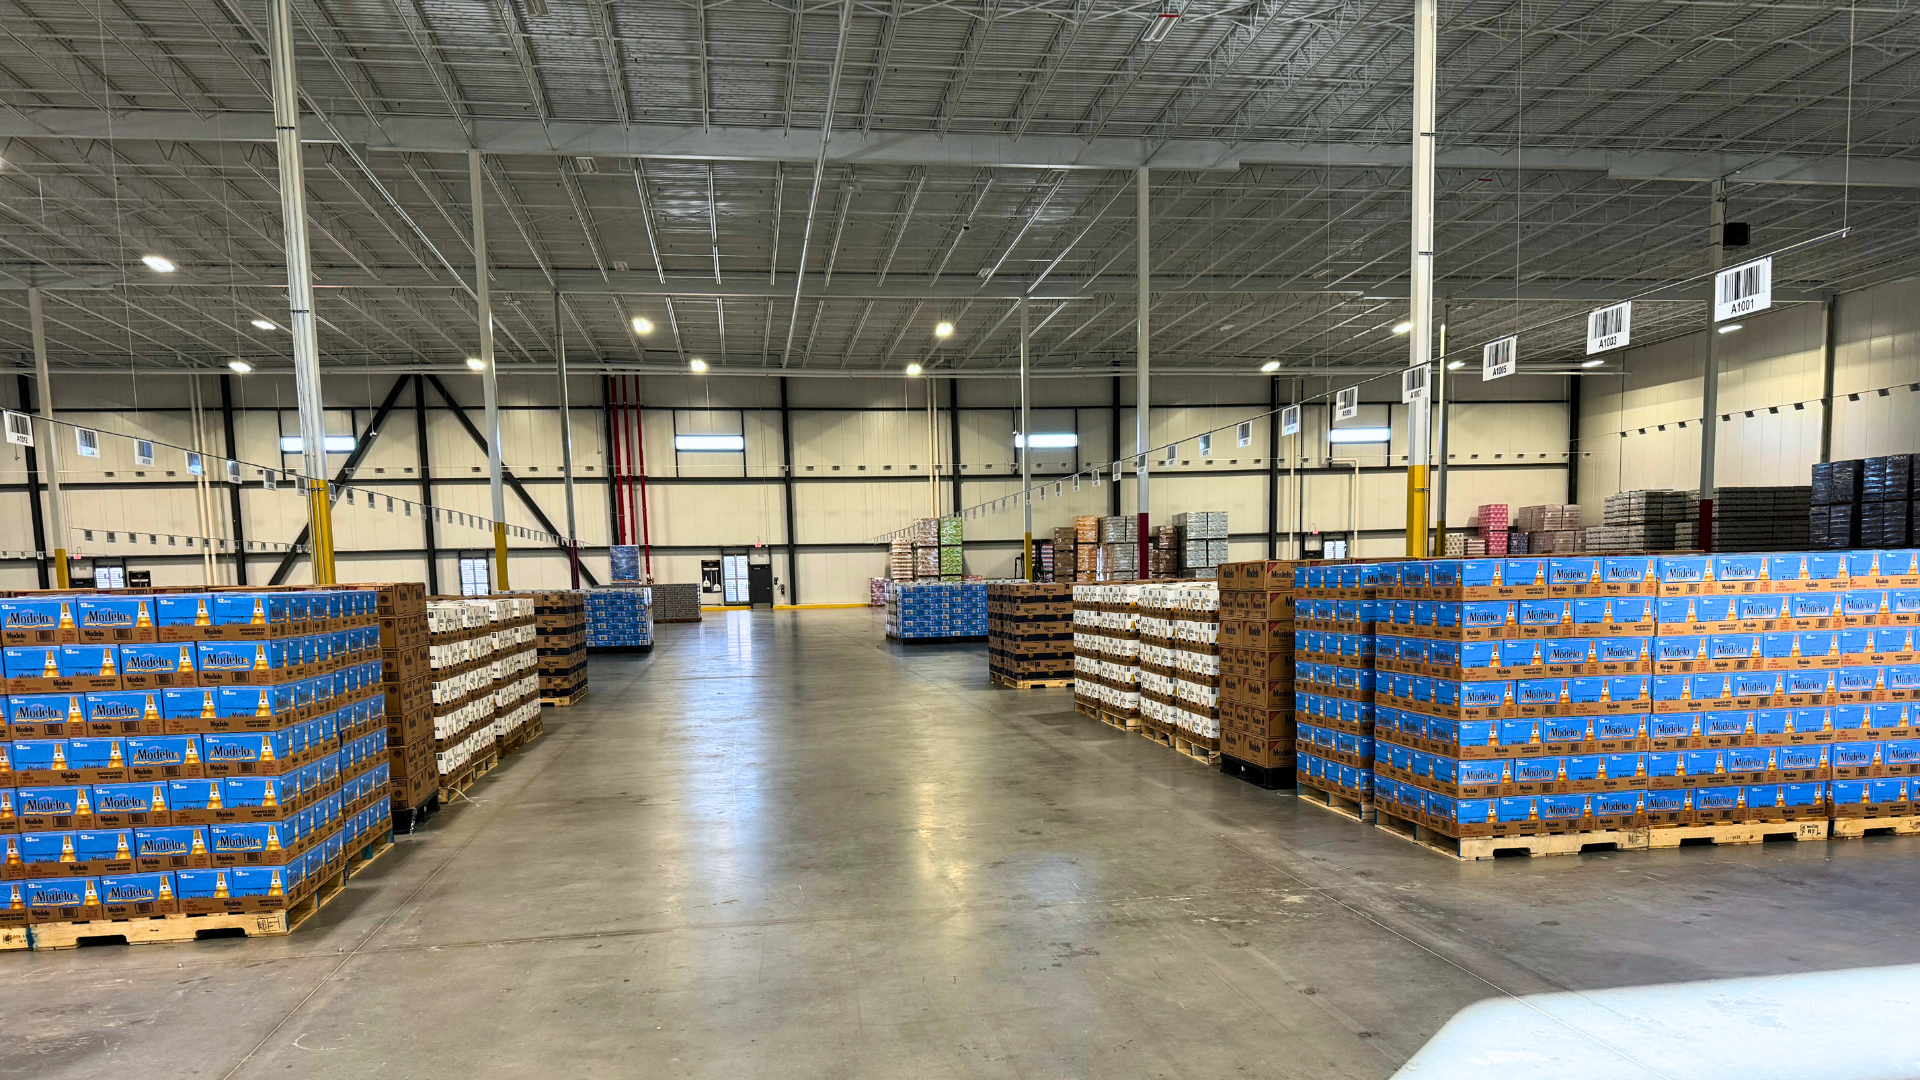 Photo of a warehouse with beer pallets